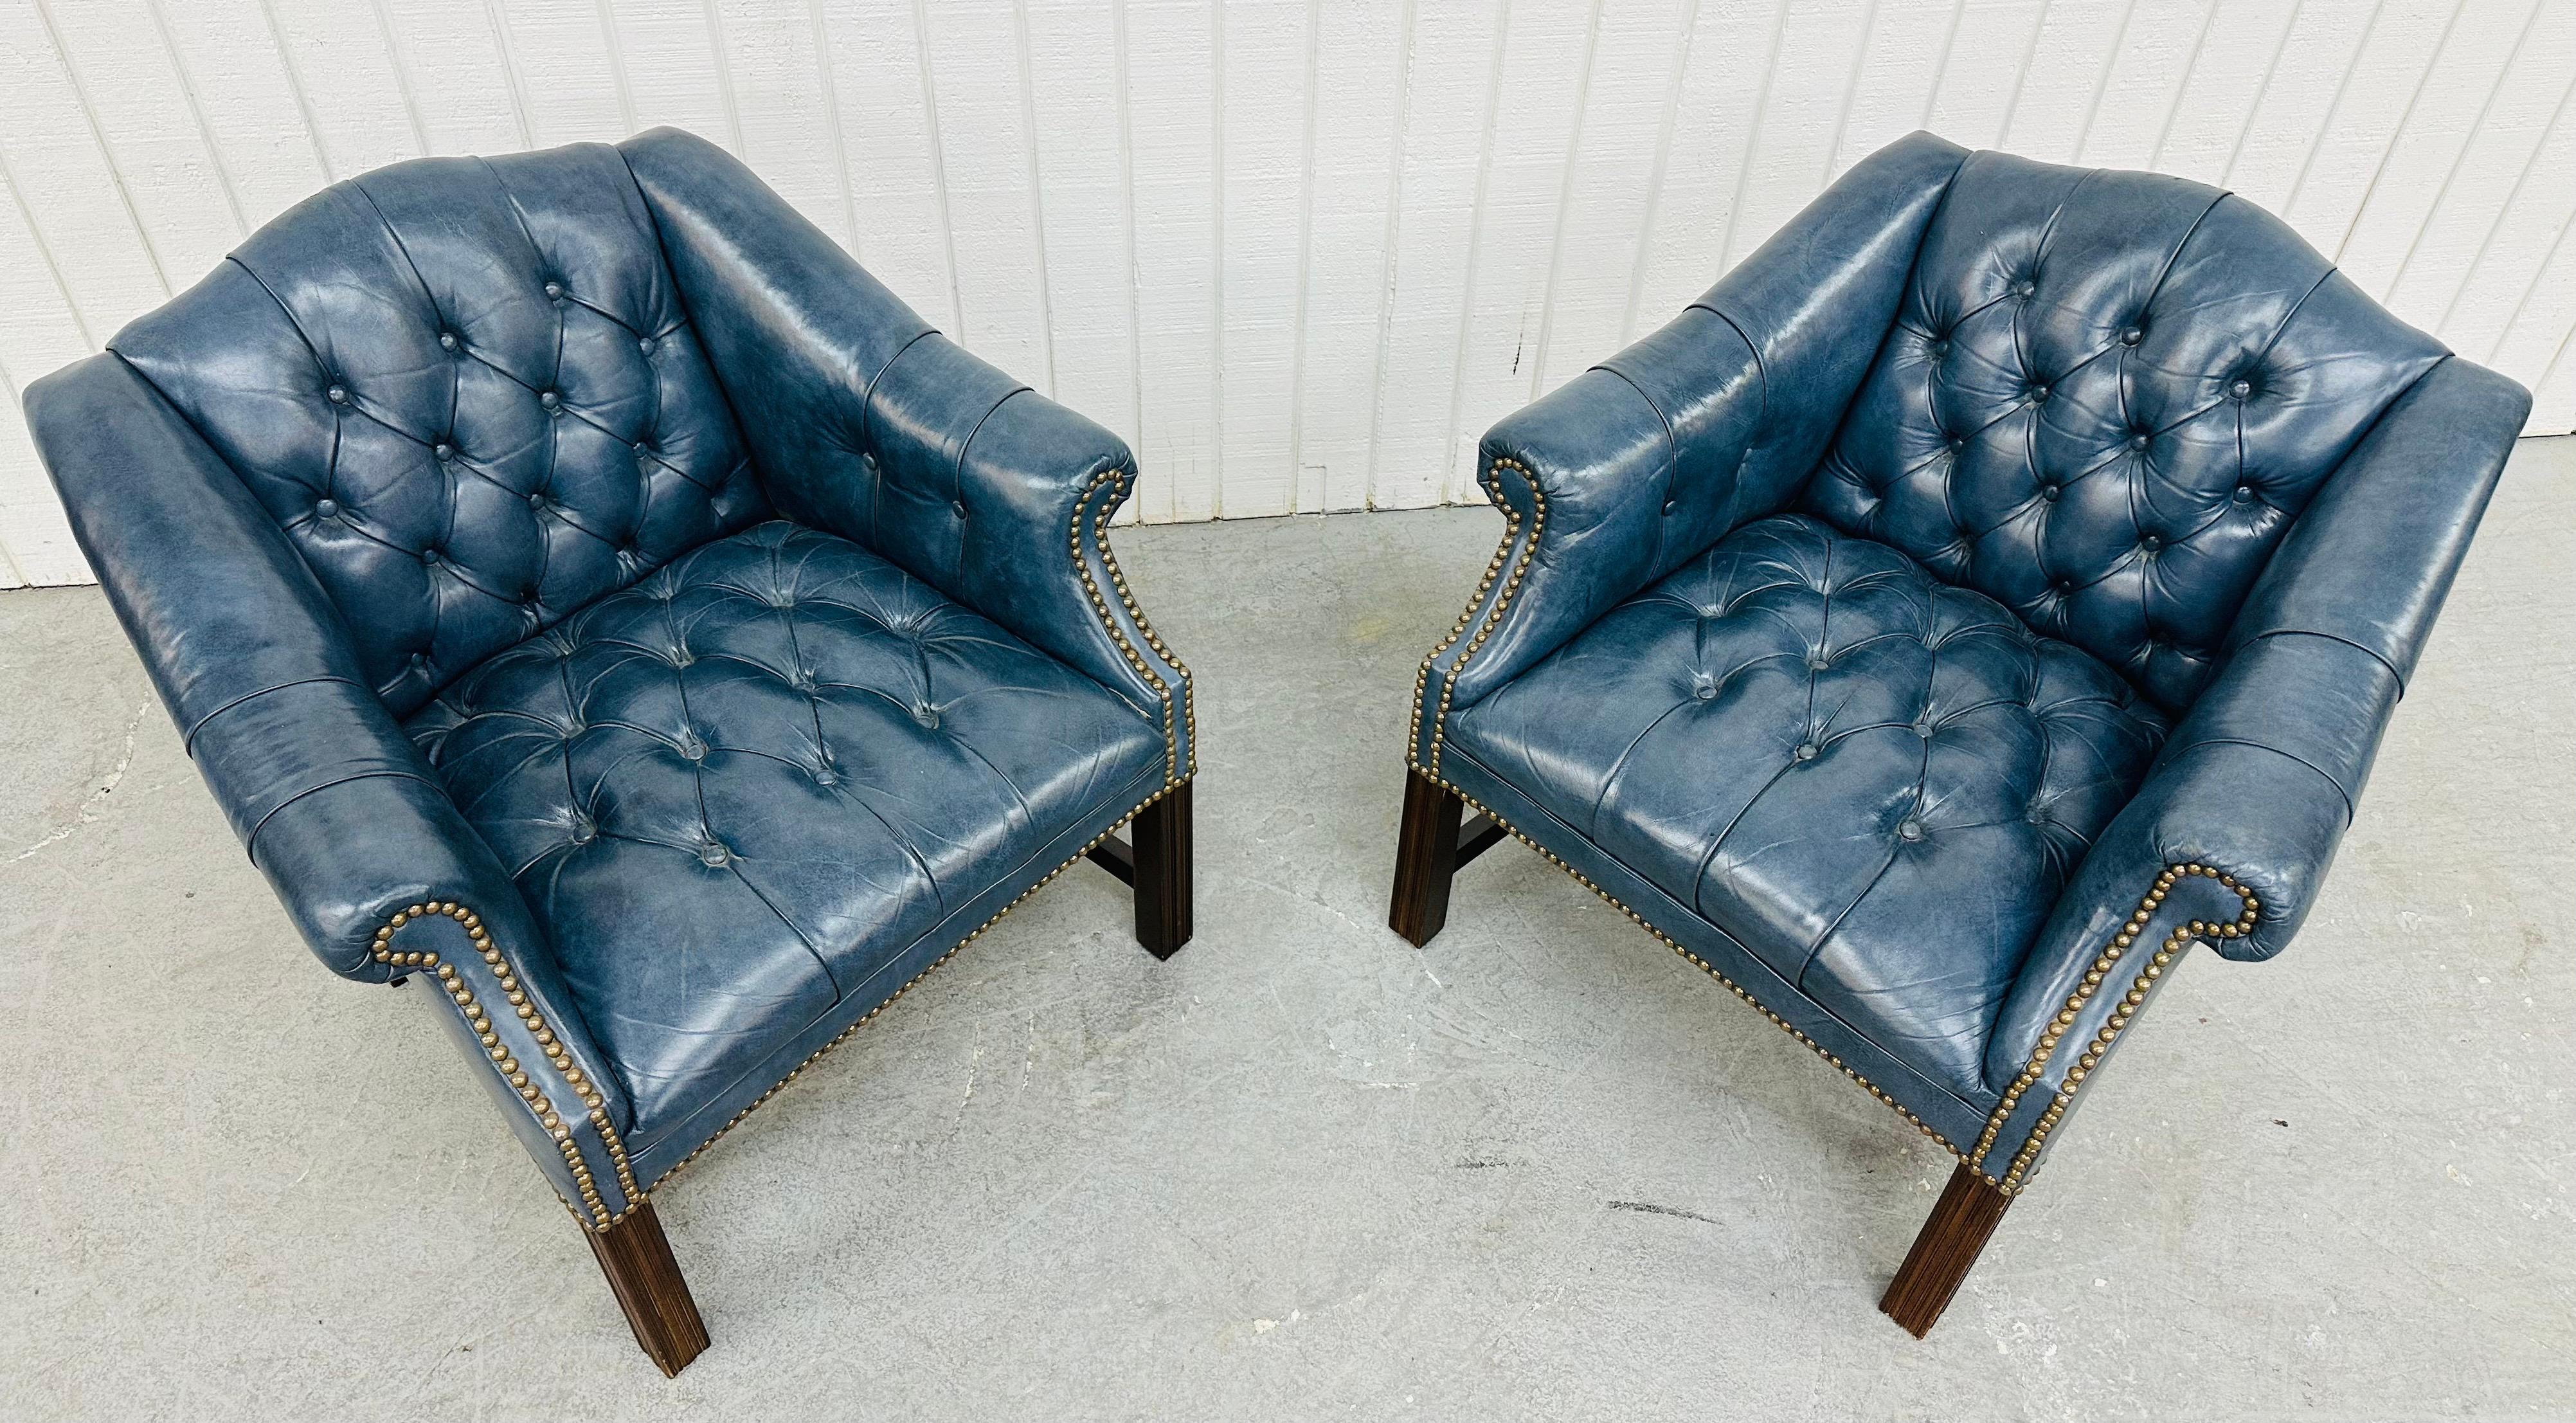 American Vintage Blue Chesterfield Arm Chairs - Set of 2